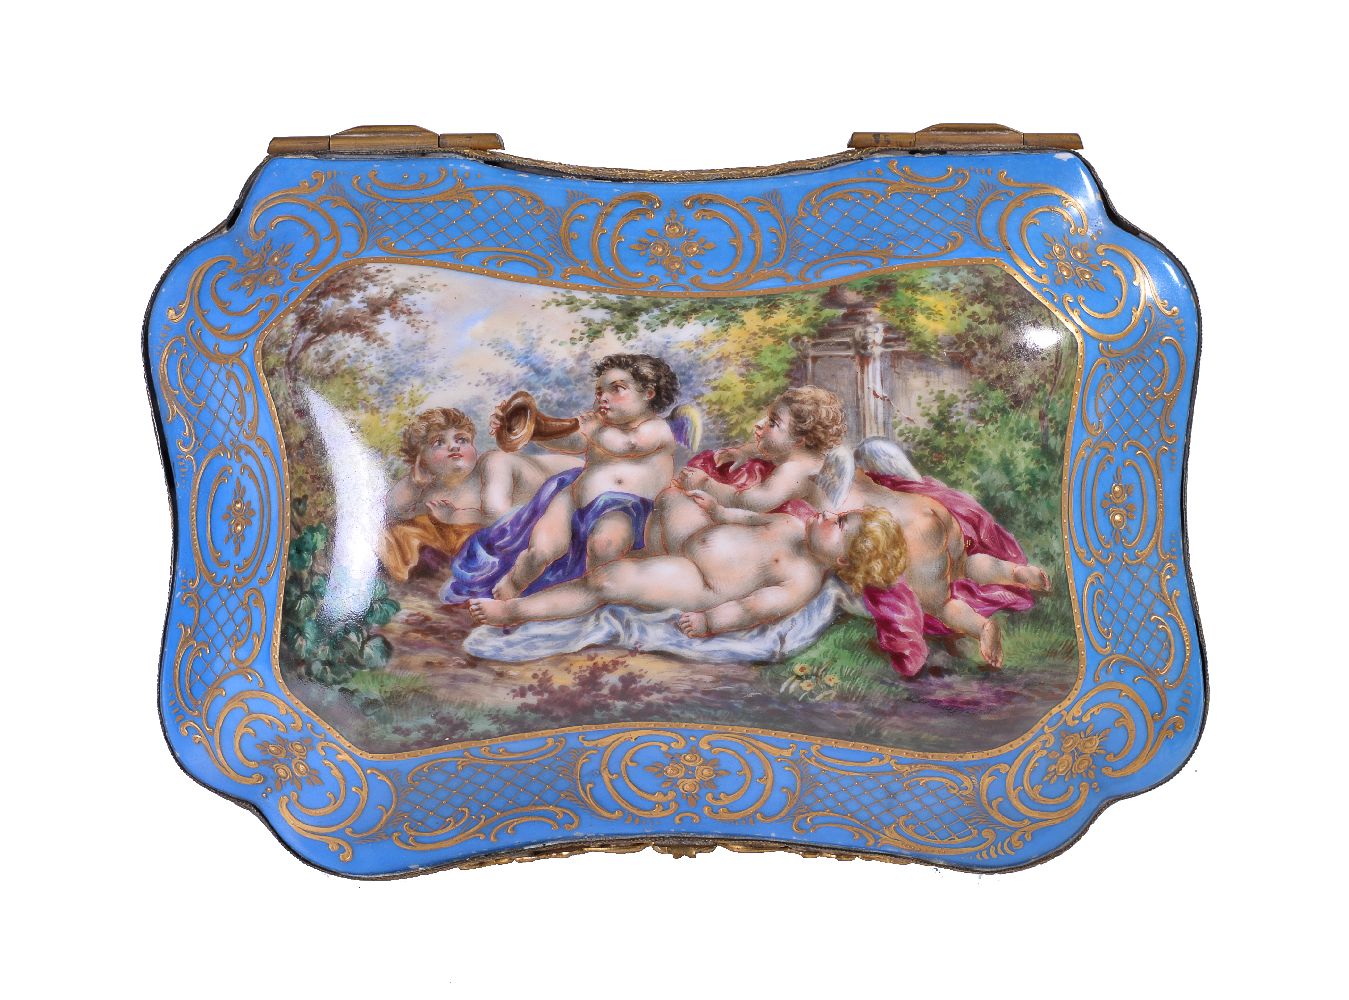 An assortment of Sevres-style porcelain, late 19th century, turquoise-ground and variously painted - Image 12 of 14